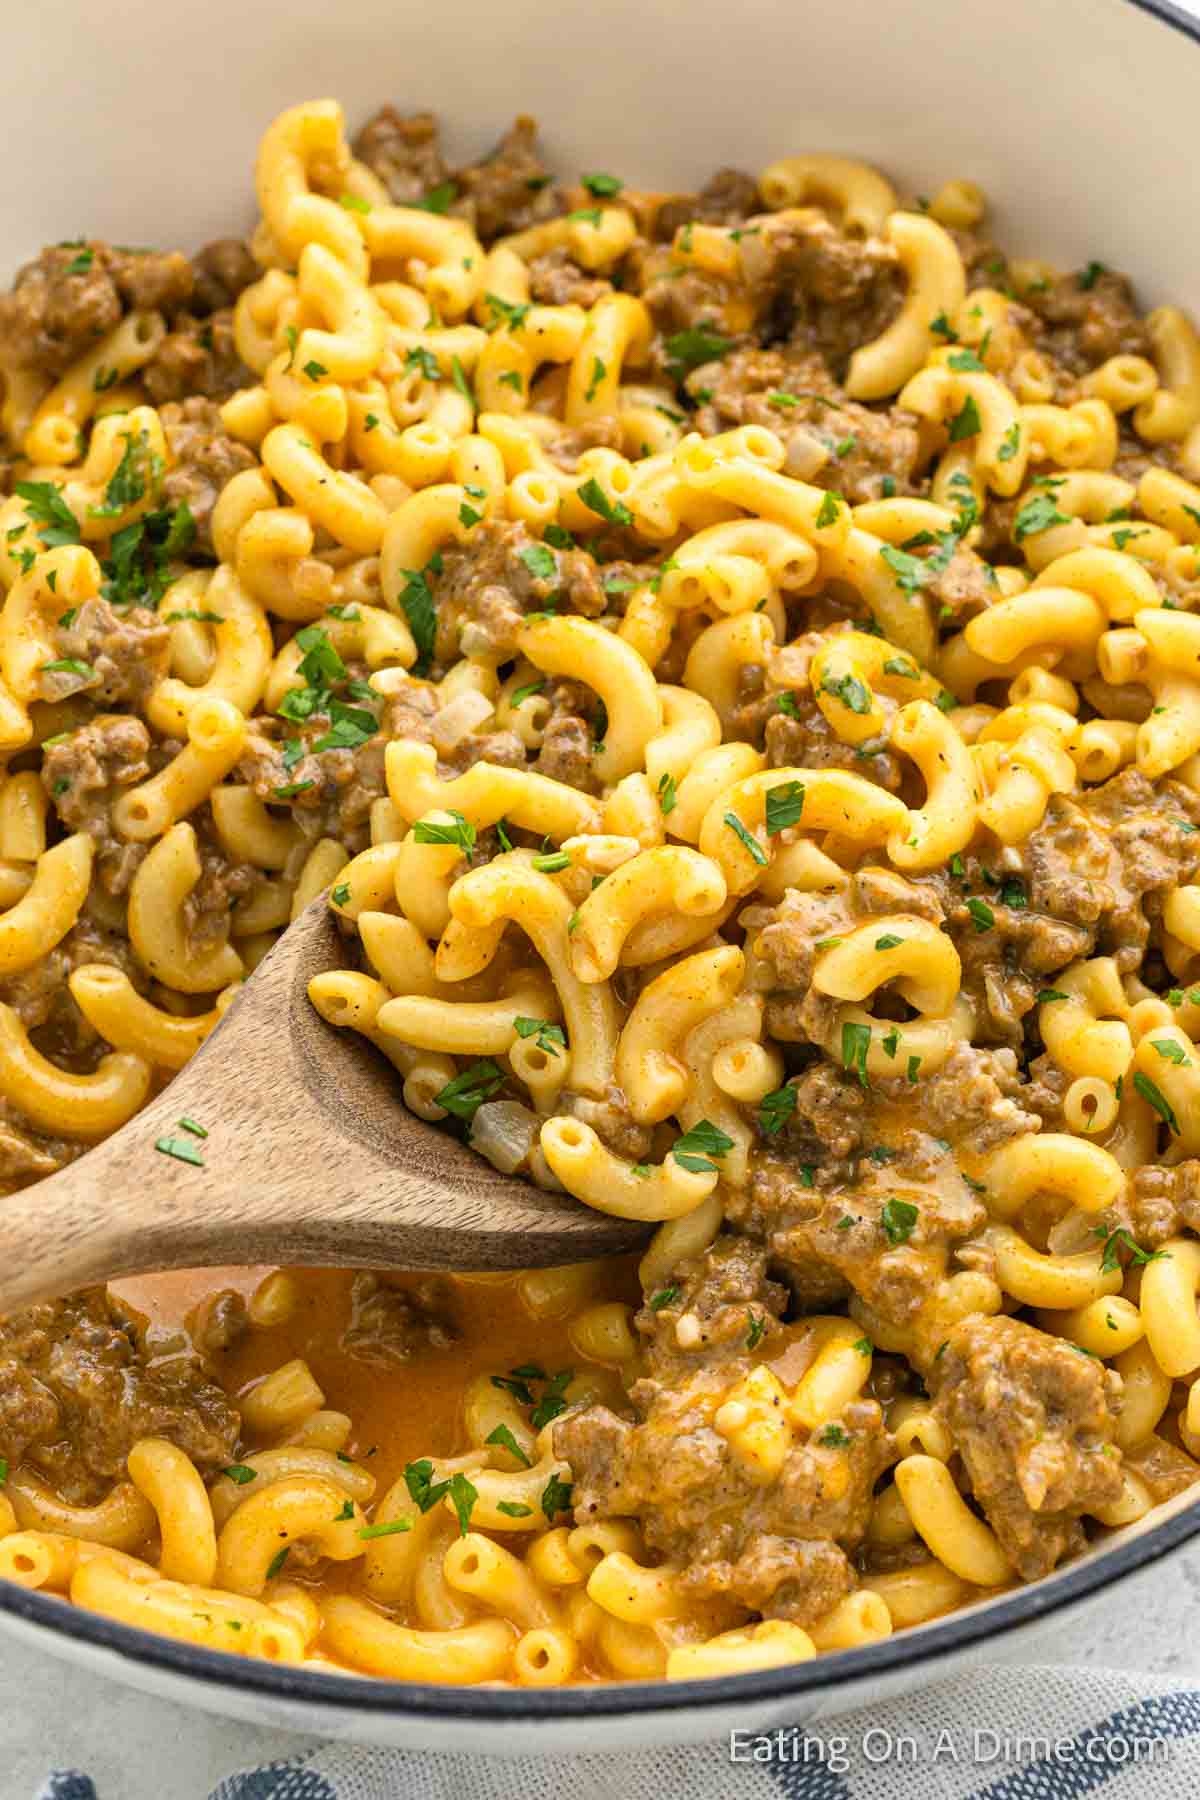 A wooden spoon stirs a pot of creamy homemade Cheeseburger Helper, featuring macaroni mixed with a savory, cheesy sauce and ground beef casserole garnished with chopped parsley for added color and flavor.